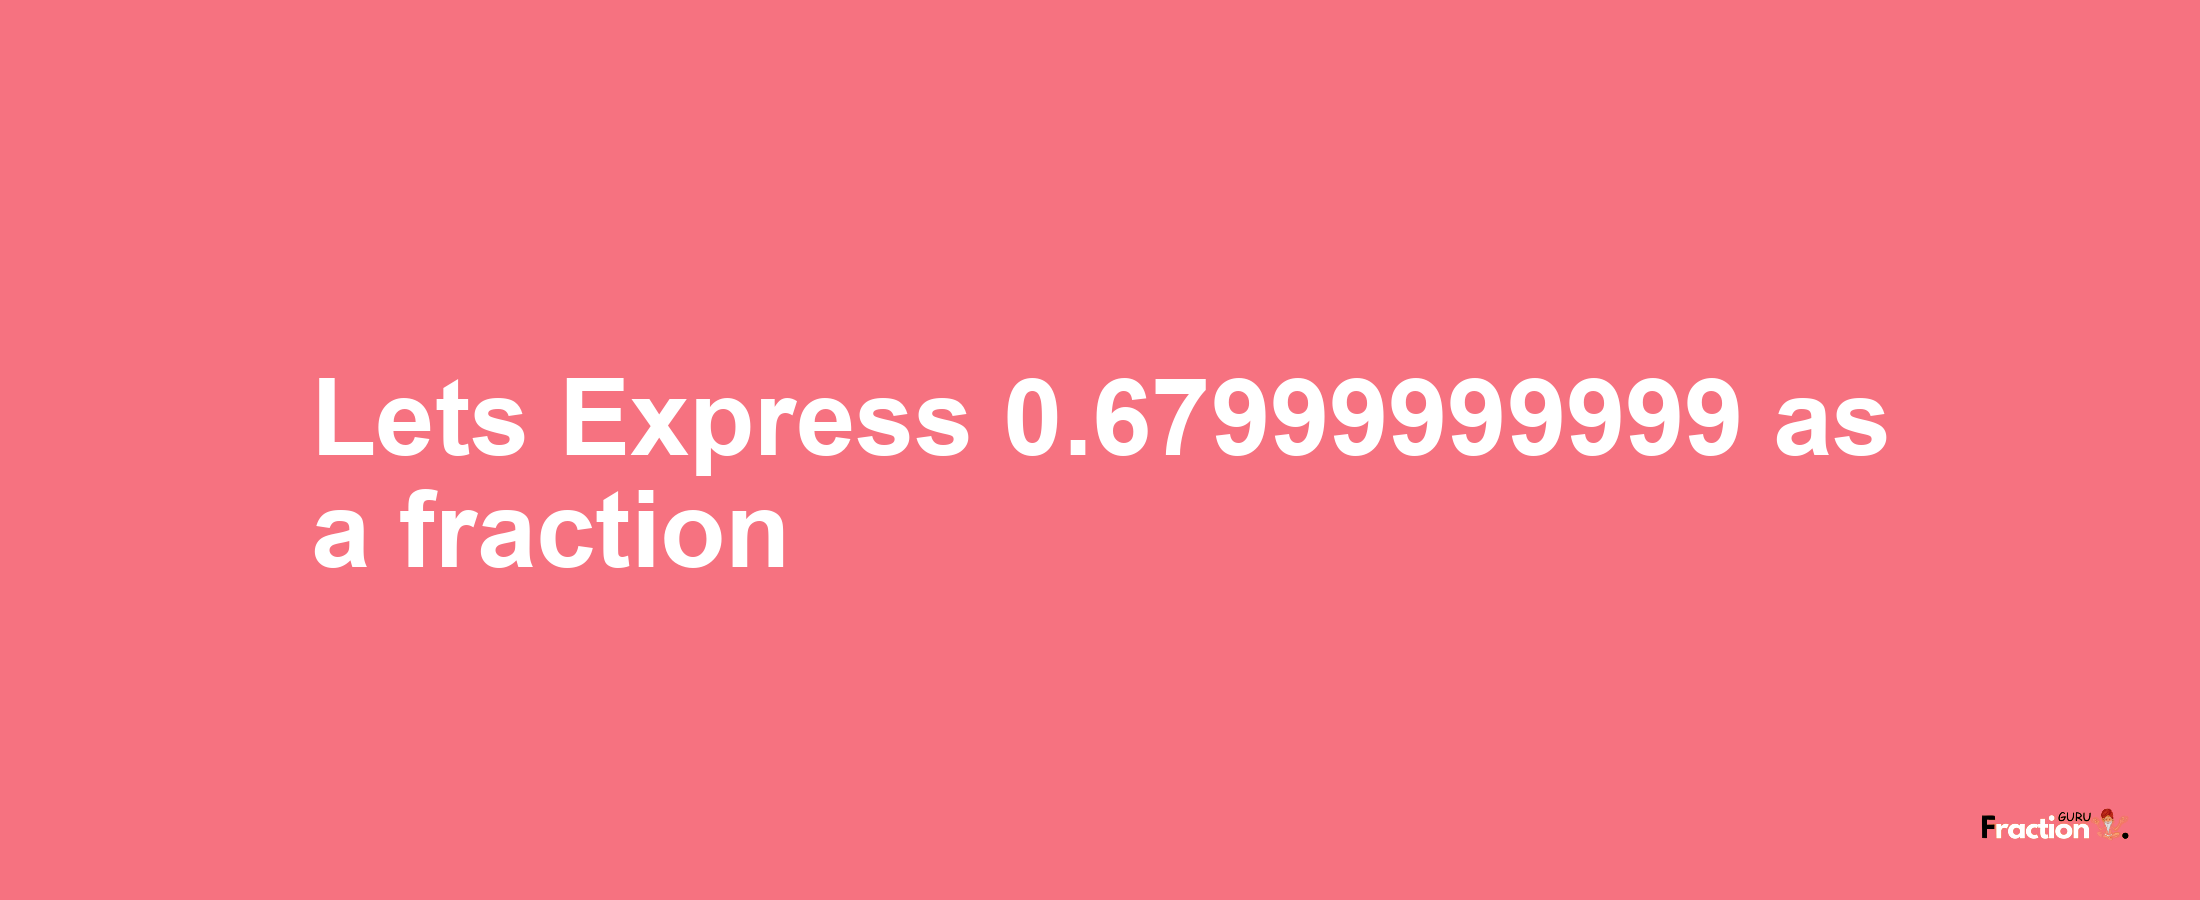 Lets Express 0.67999999999 as afraction